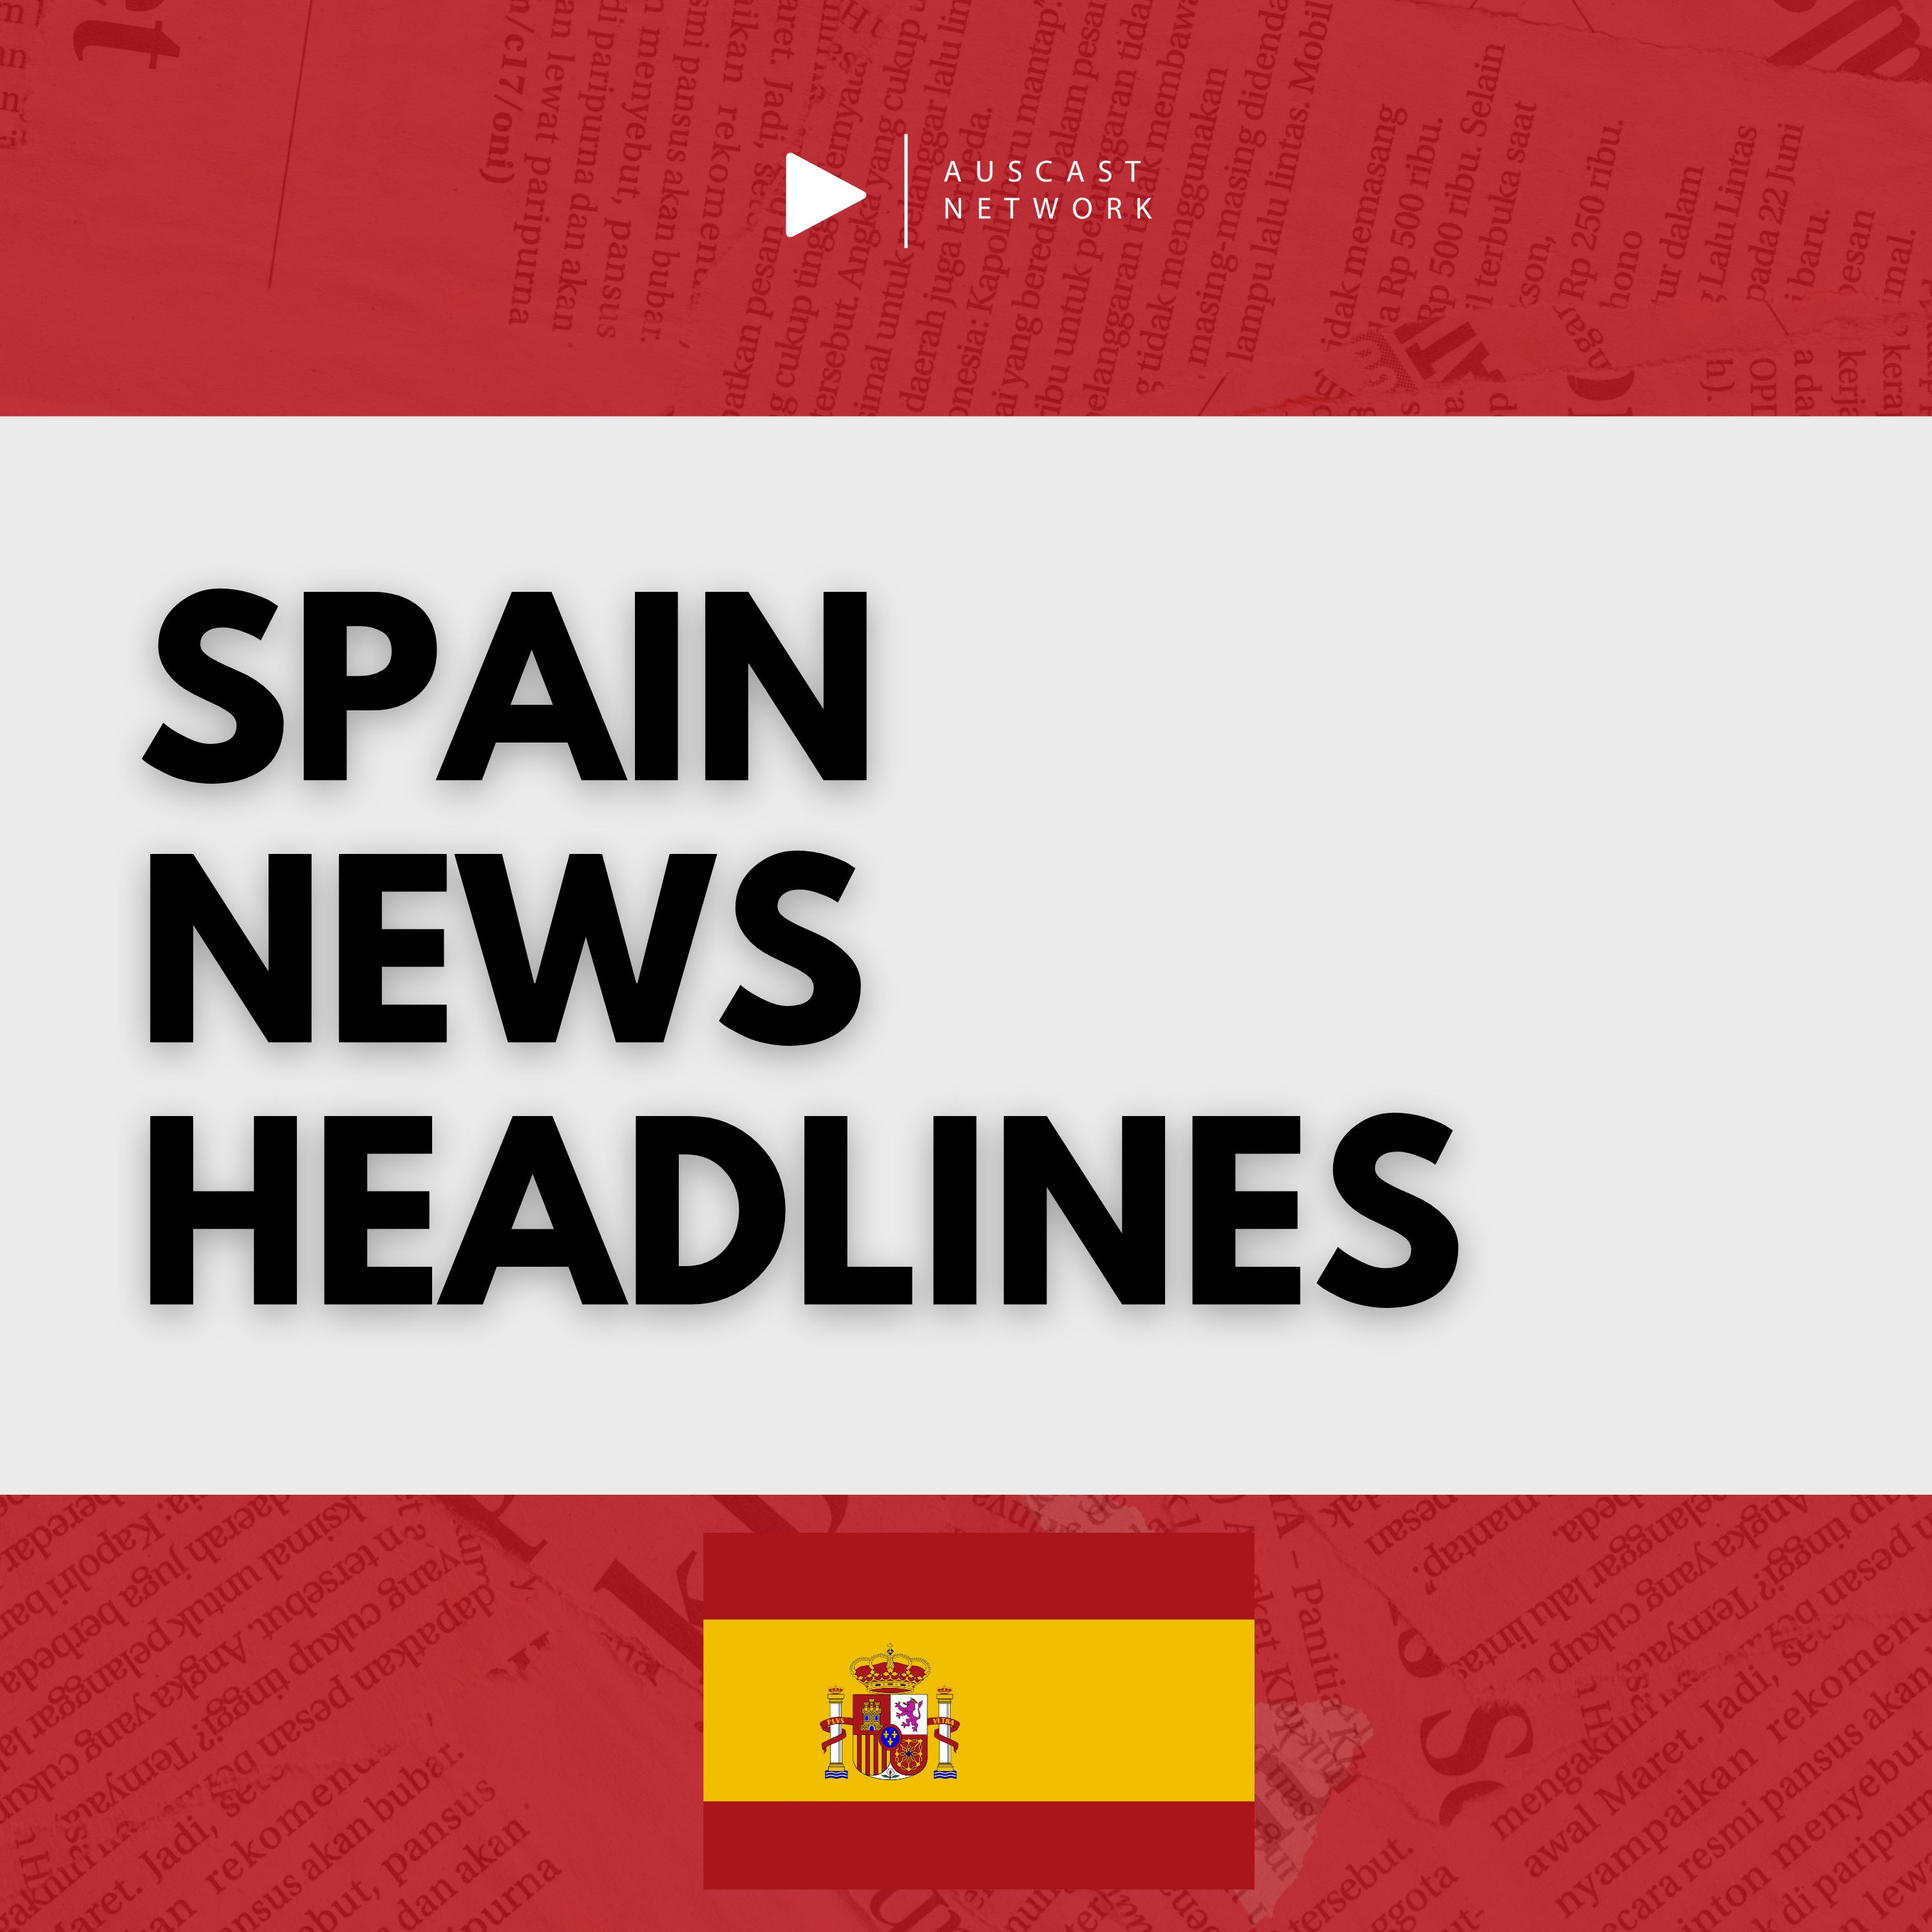 Wednesday Mar 29, 2023 - Spain - Watchdog launches case against Google,  Workers shortage,  Komodo Dragon good news